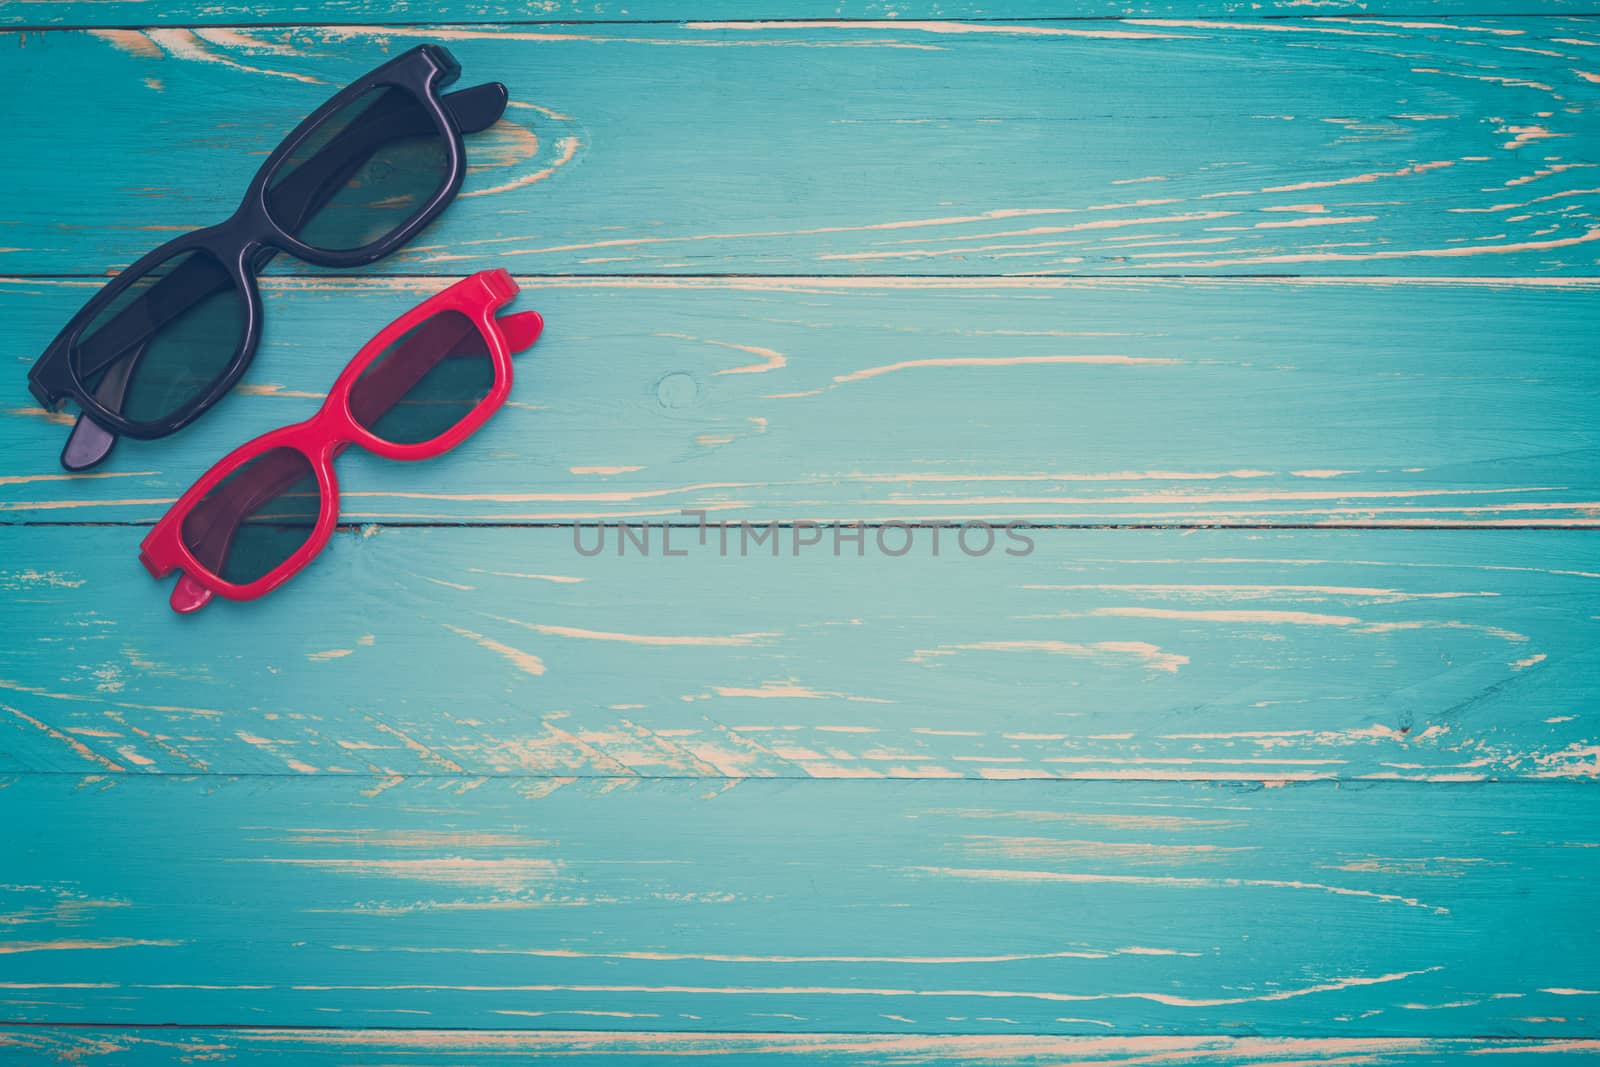 Sunglasses / Sunglasses on Wooden Background by supparsorn